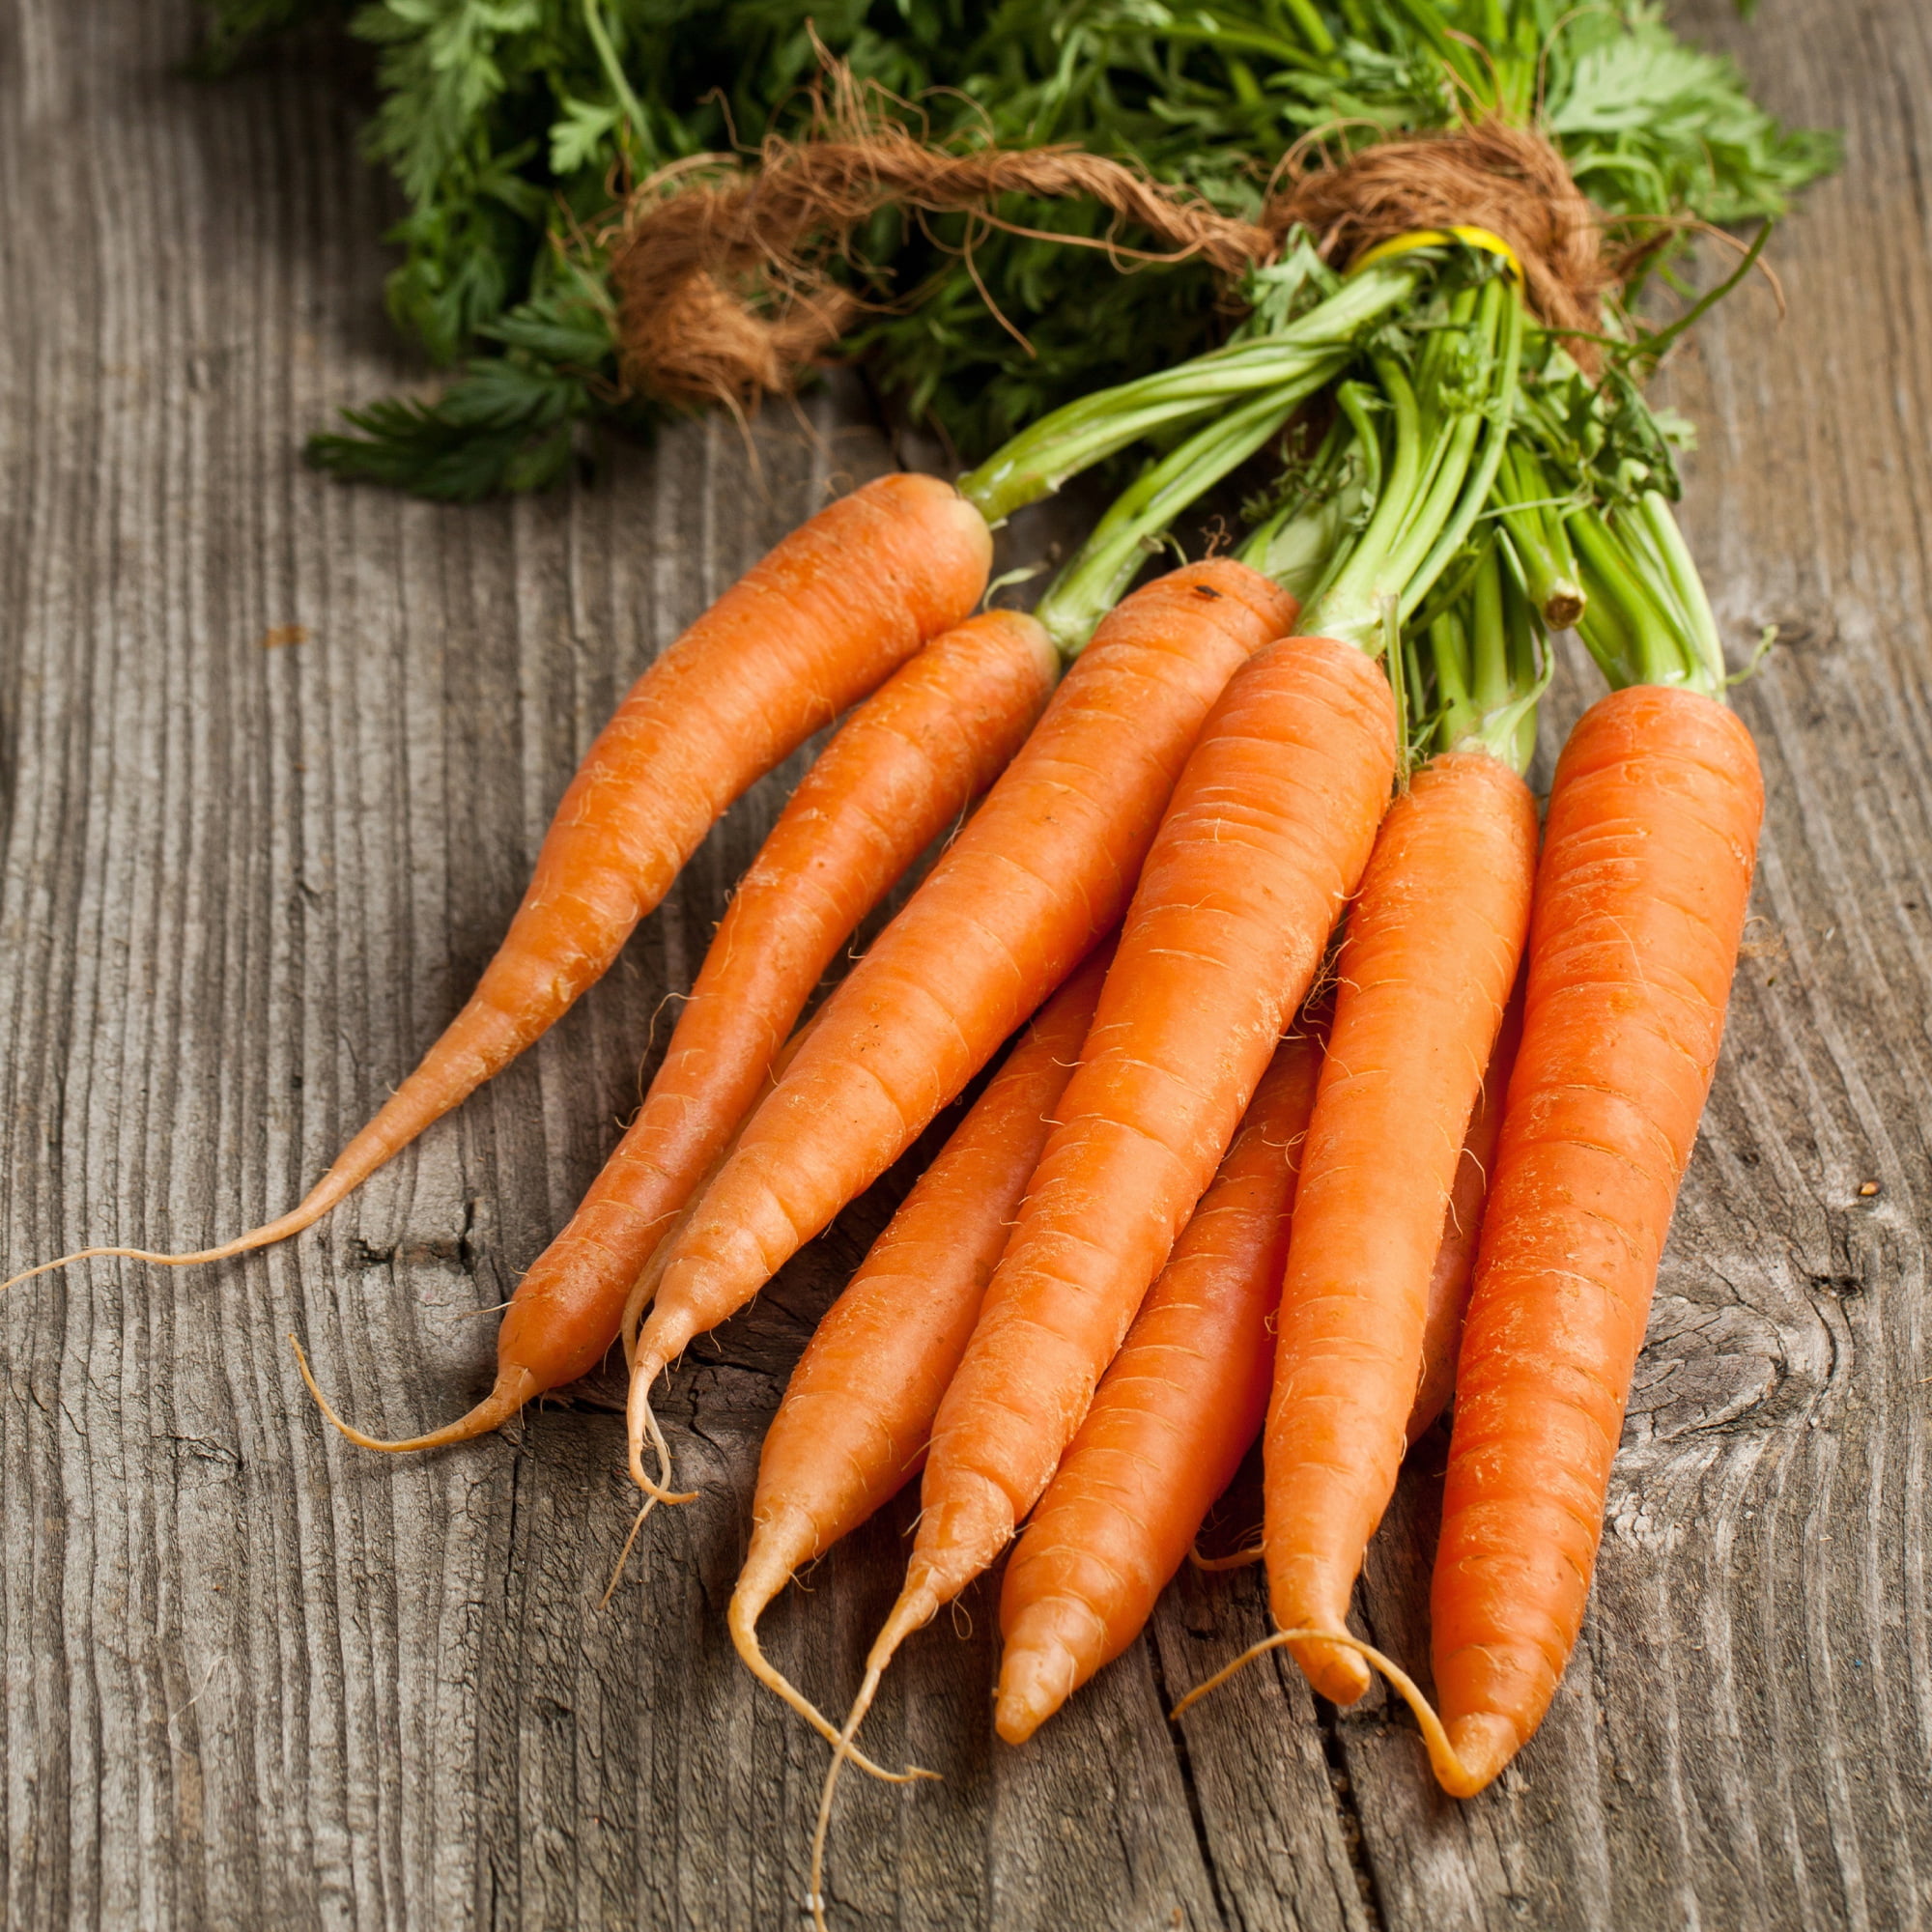 Baby Carrot Thai Vegetable Fruit Seeds Good Quality Free Shiping 10+Seed 